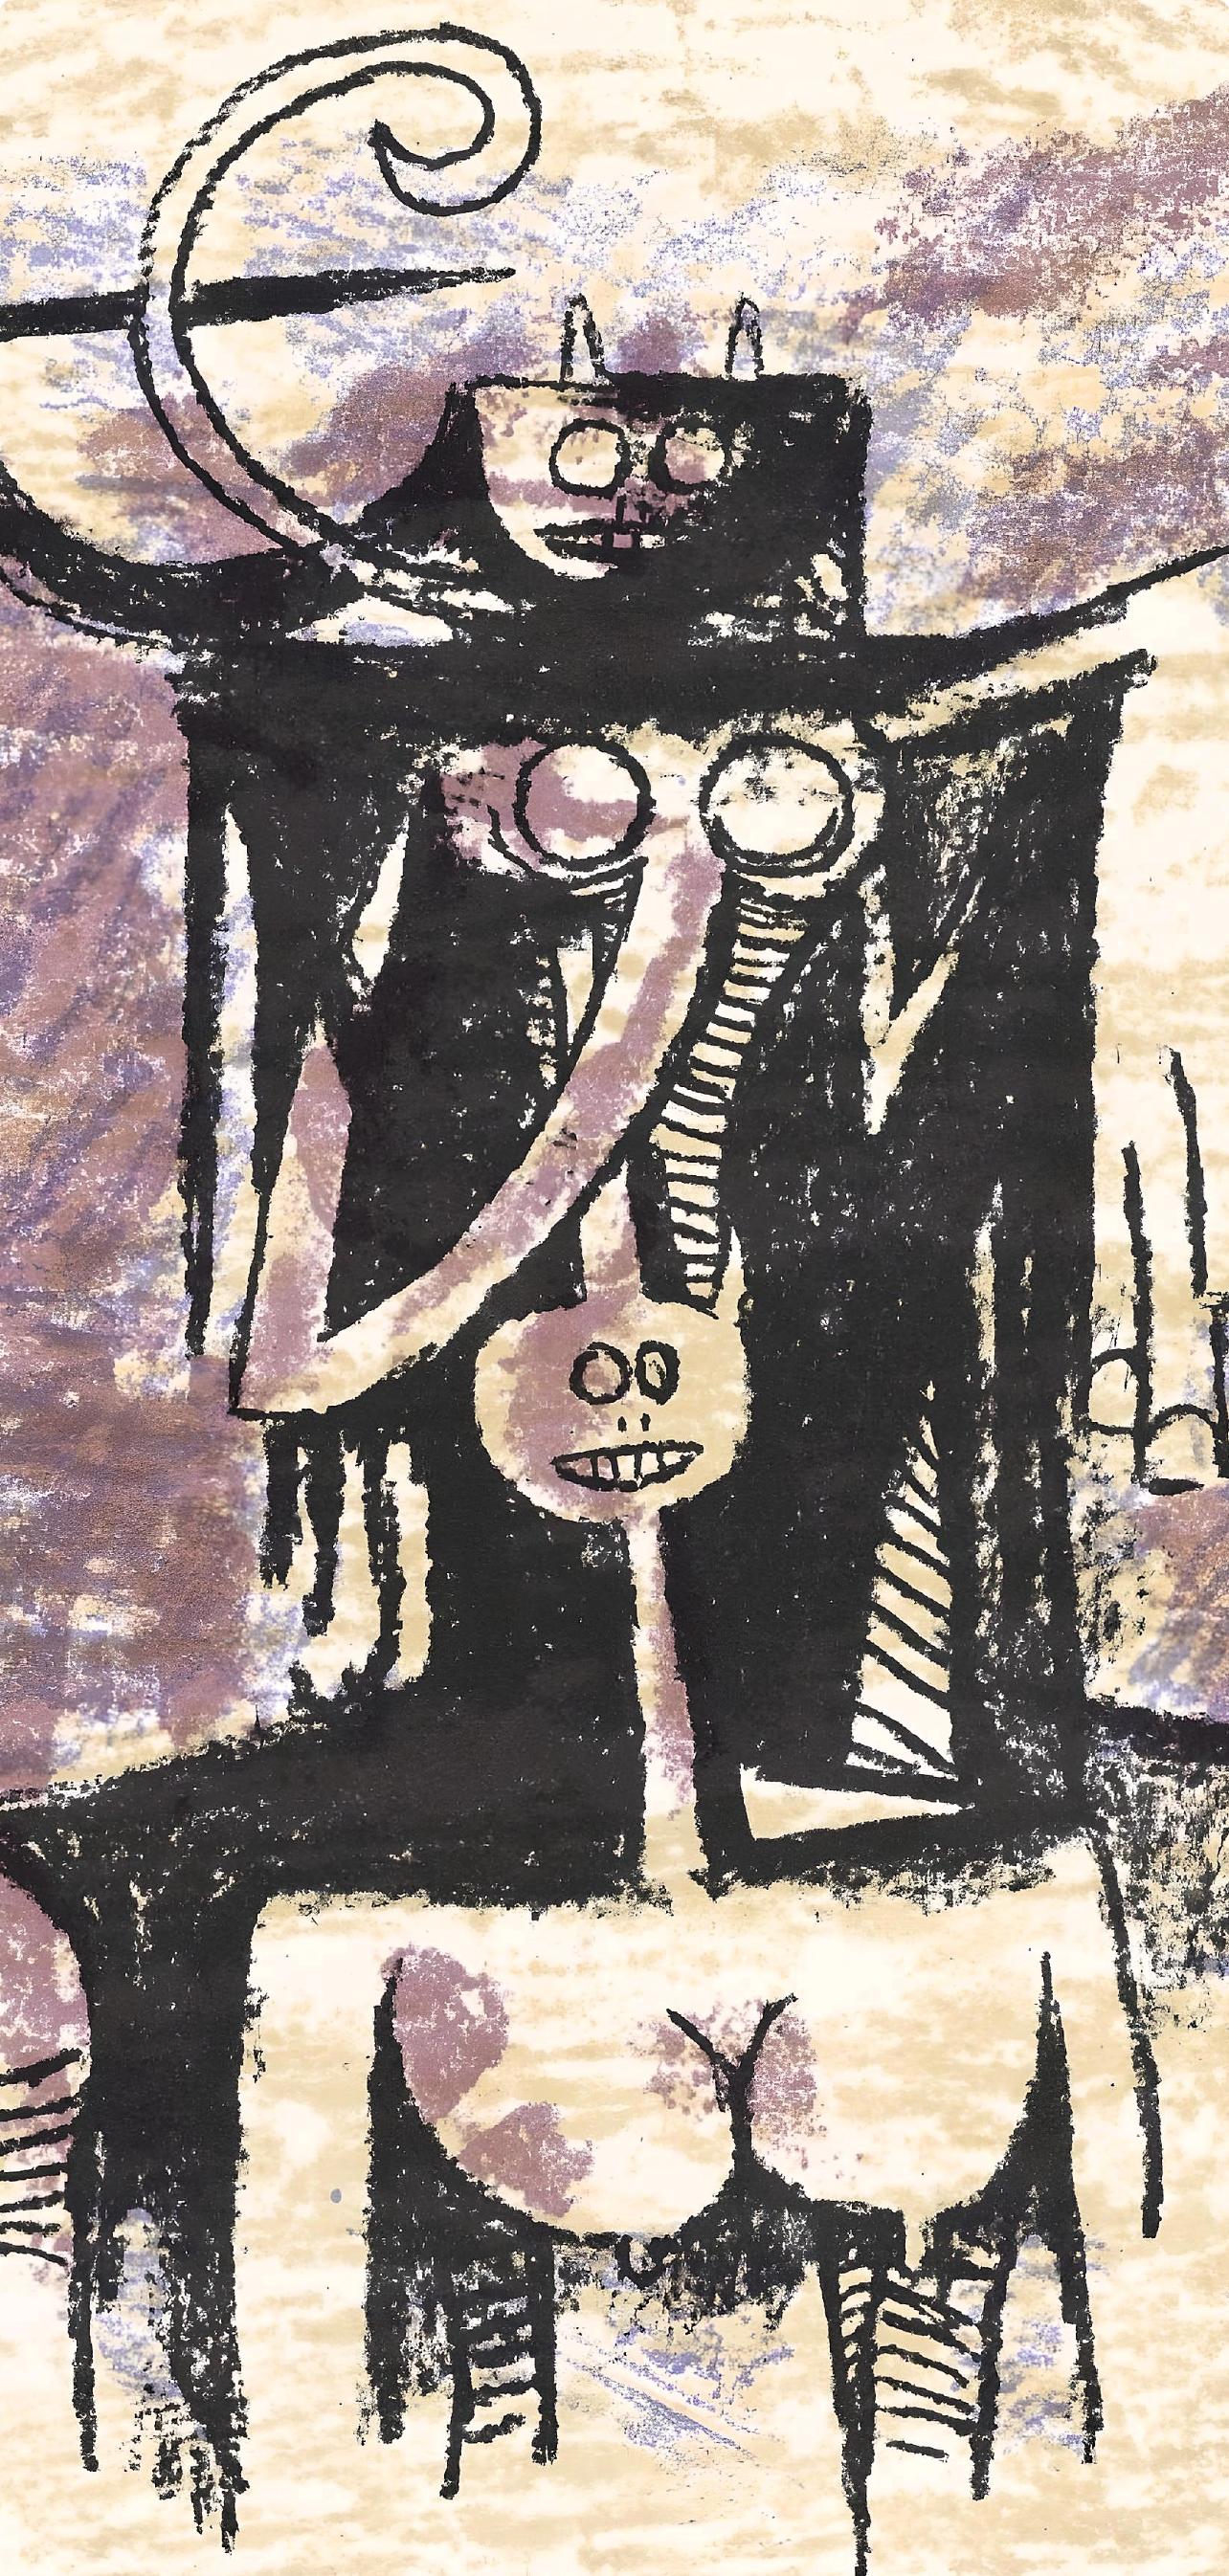 Lam 林飛龍, Composition, XXe Siècle (after) - Print by Wifredo Lam